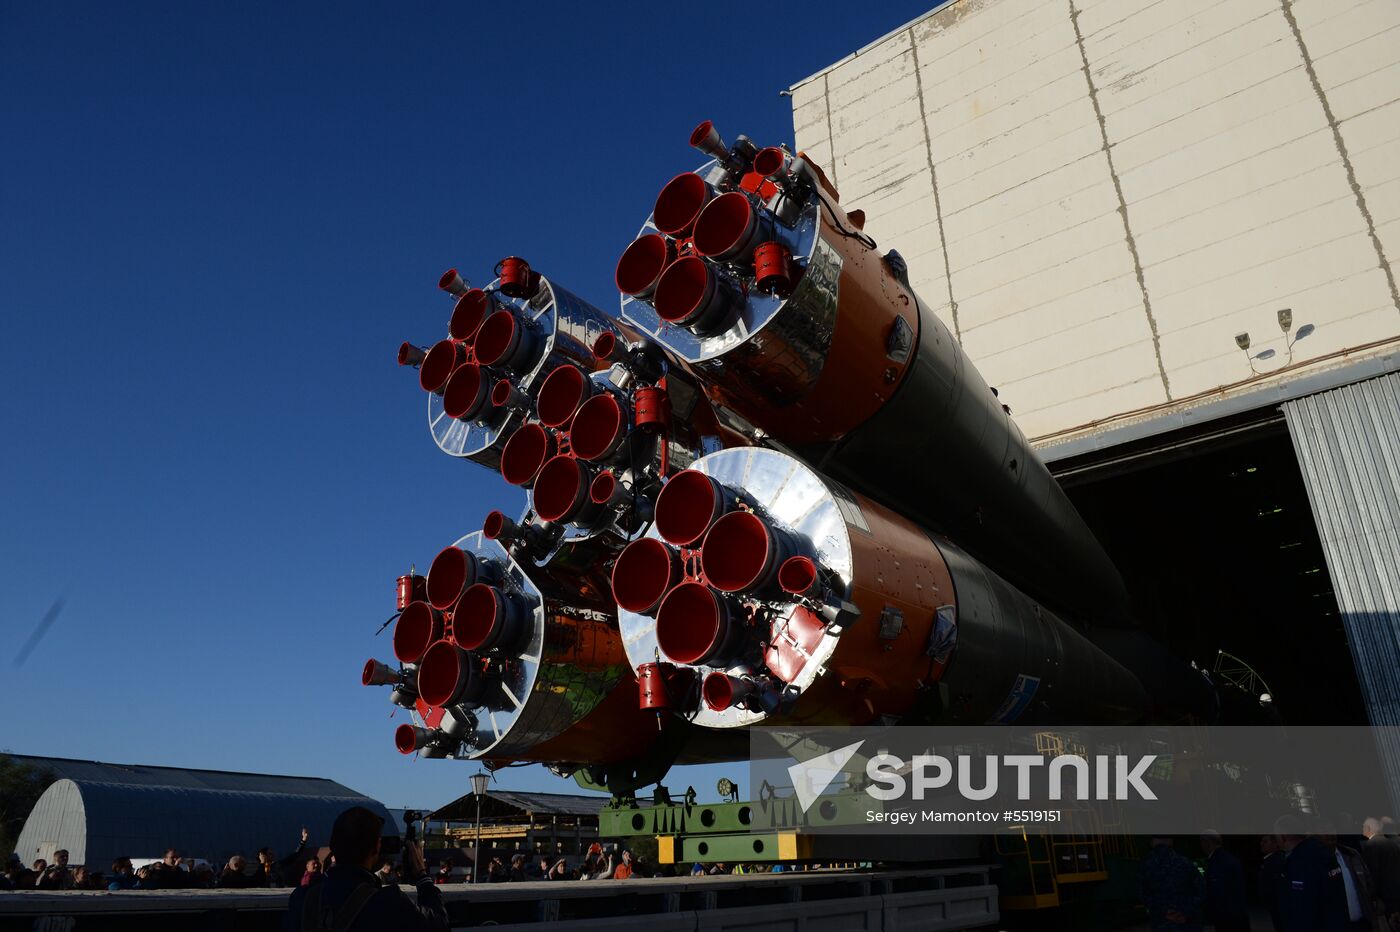 Soyuz-FG launch vehicle delivered to Baikonur launch site